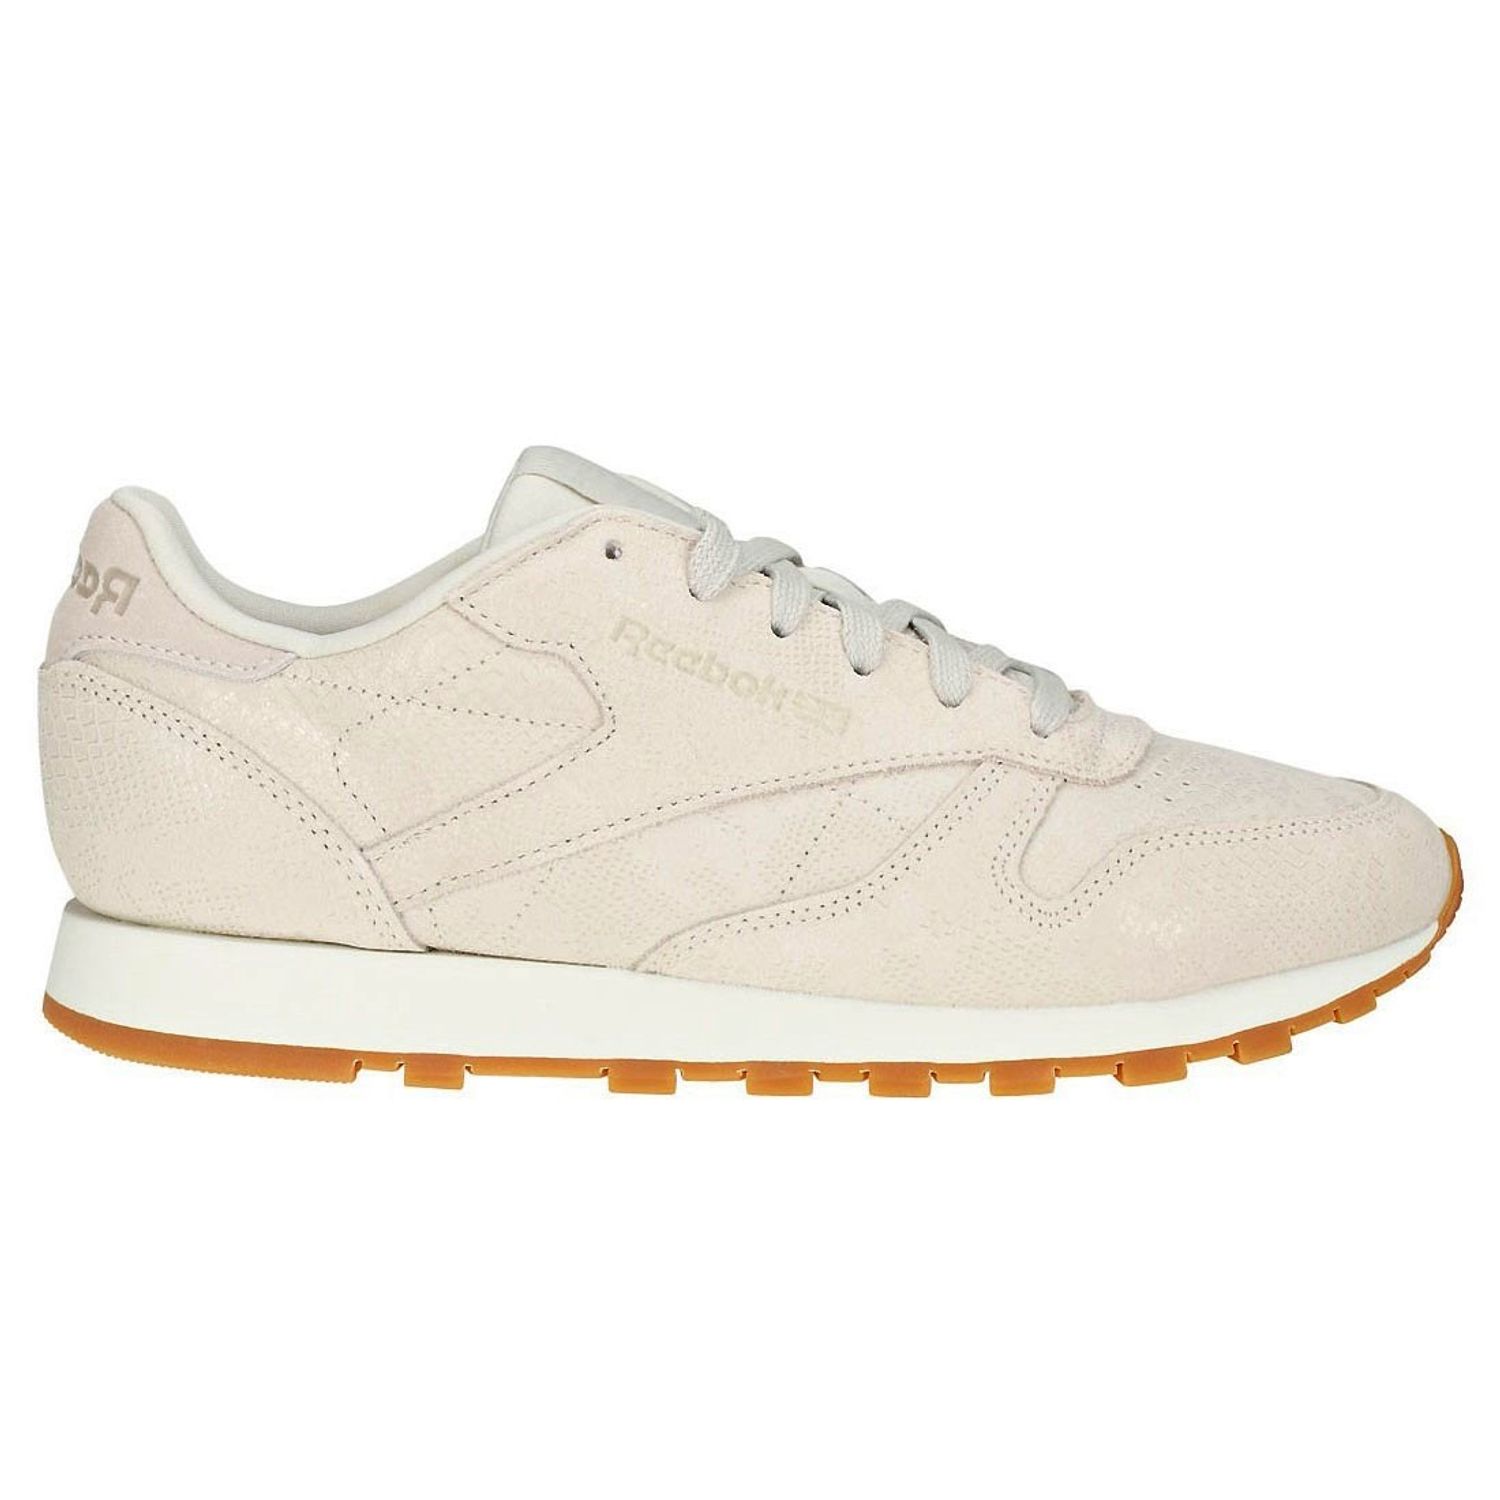 Zapatillas Reebok Classic Leather Mujer - Sporting - Mobile